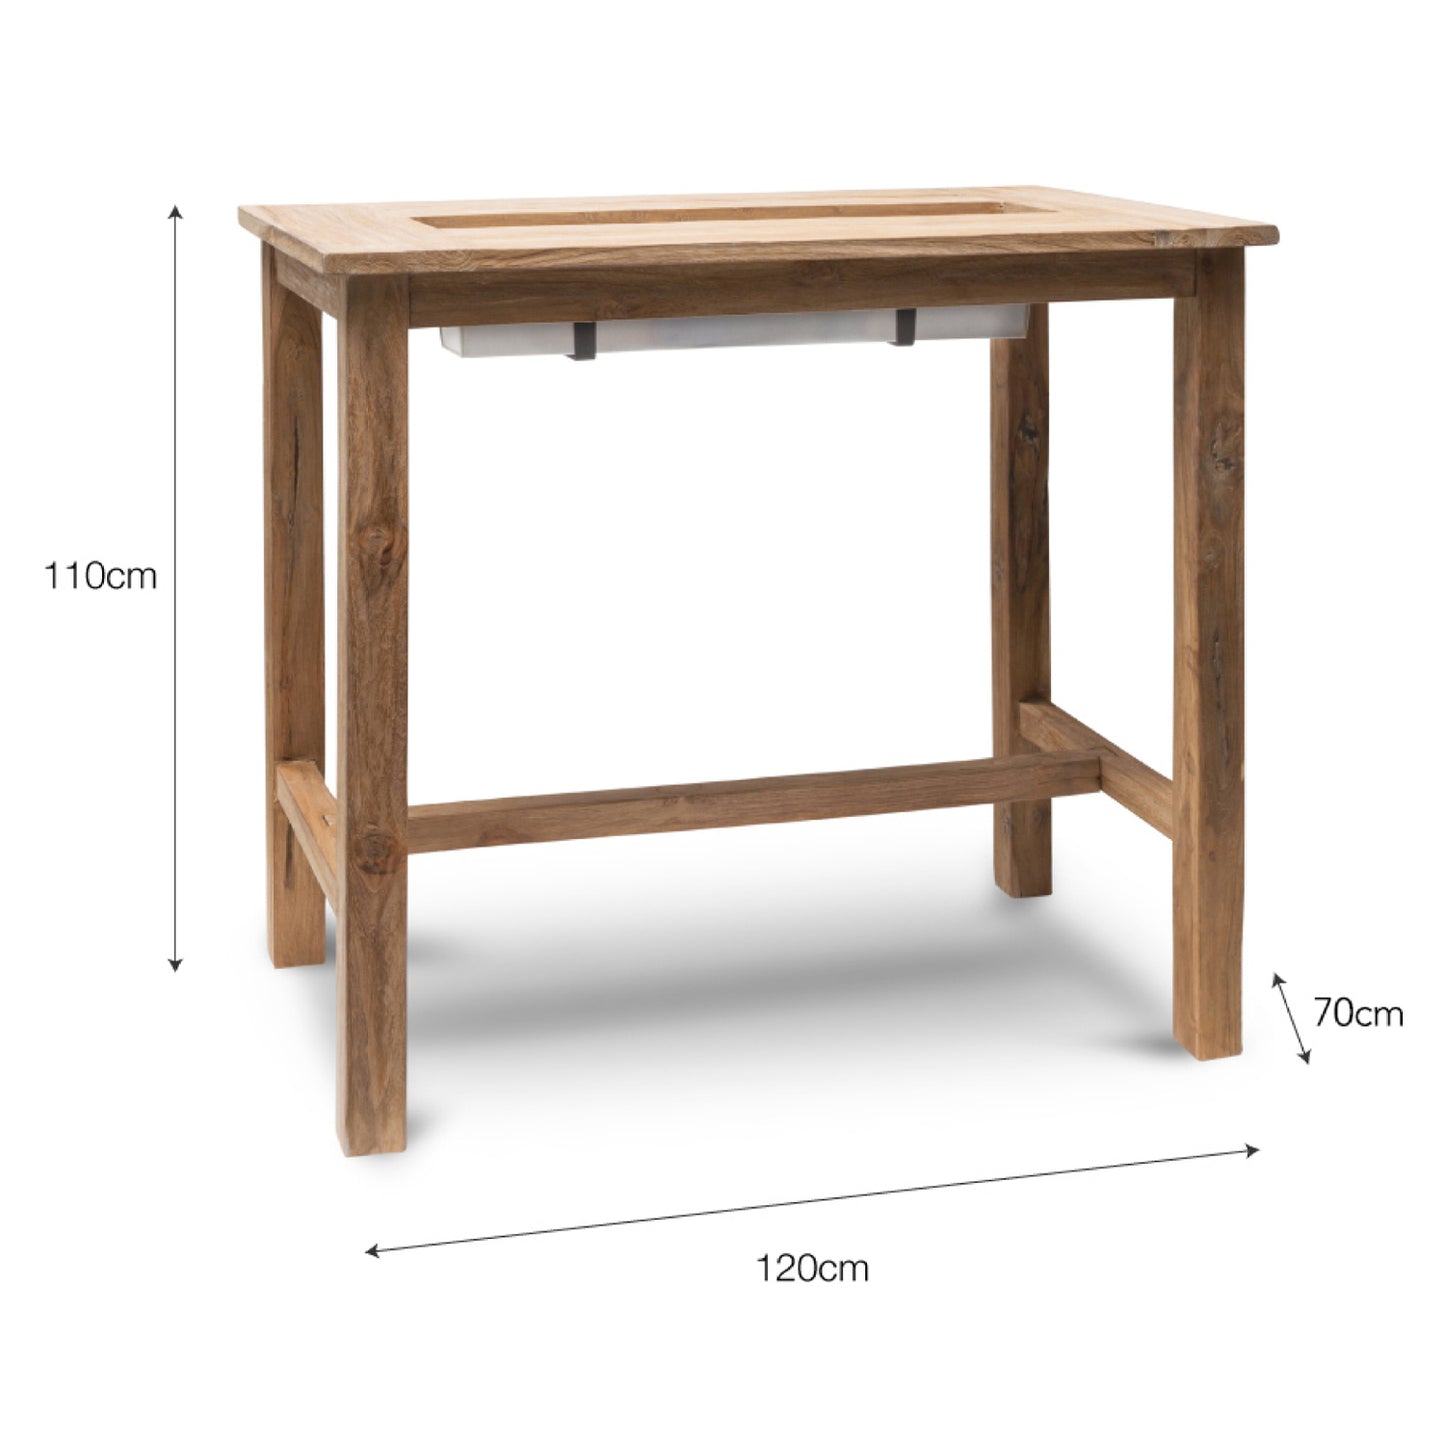 St Mawes Drinks/Planter Outdoor Bar Table 120cm Teak by Garden Trading